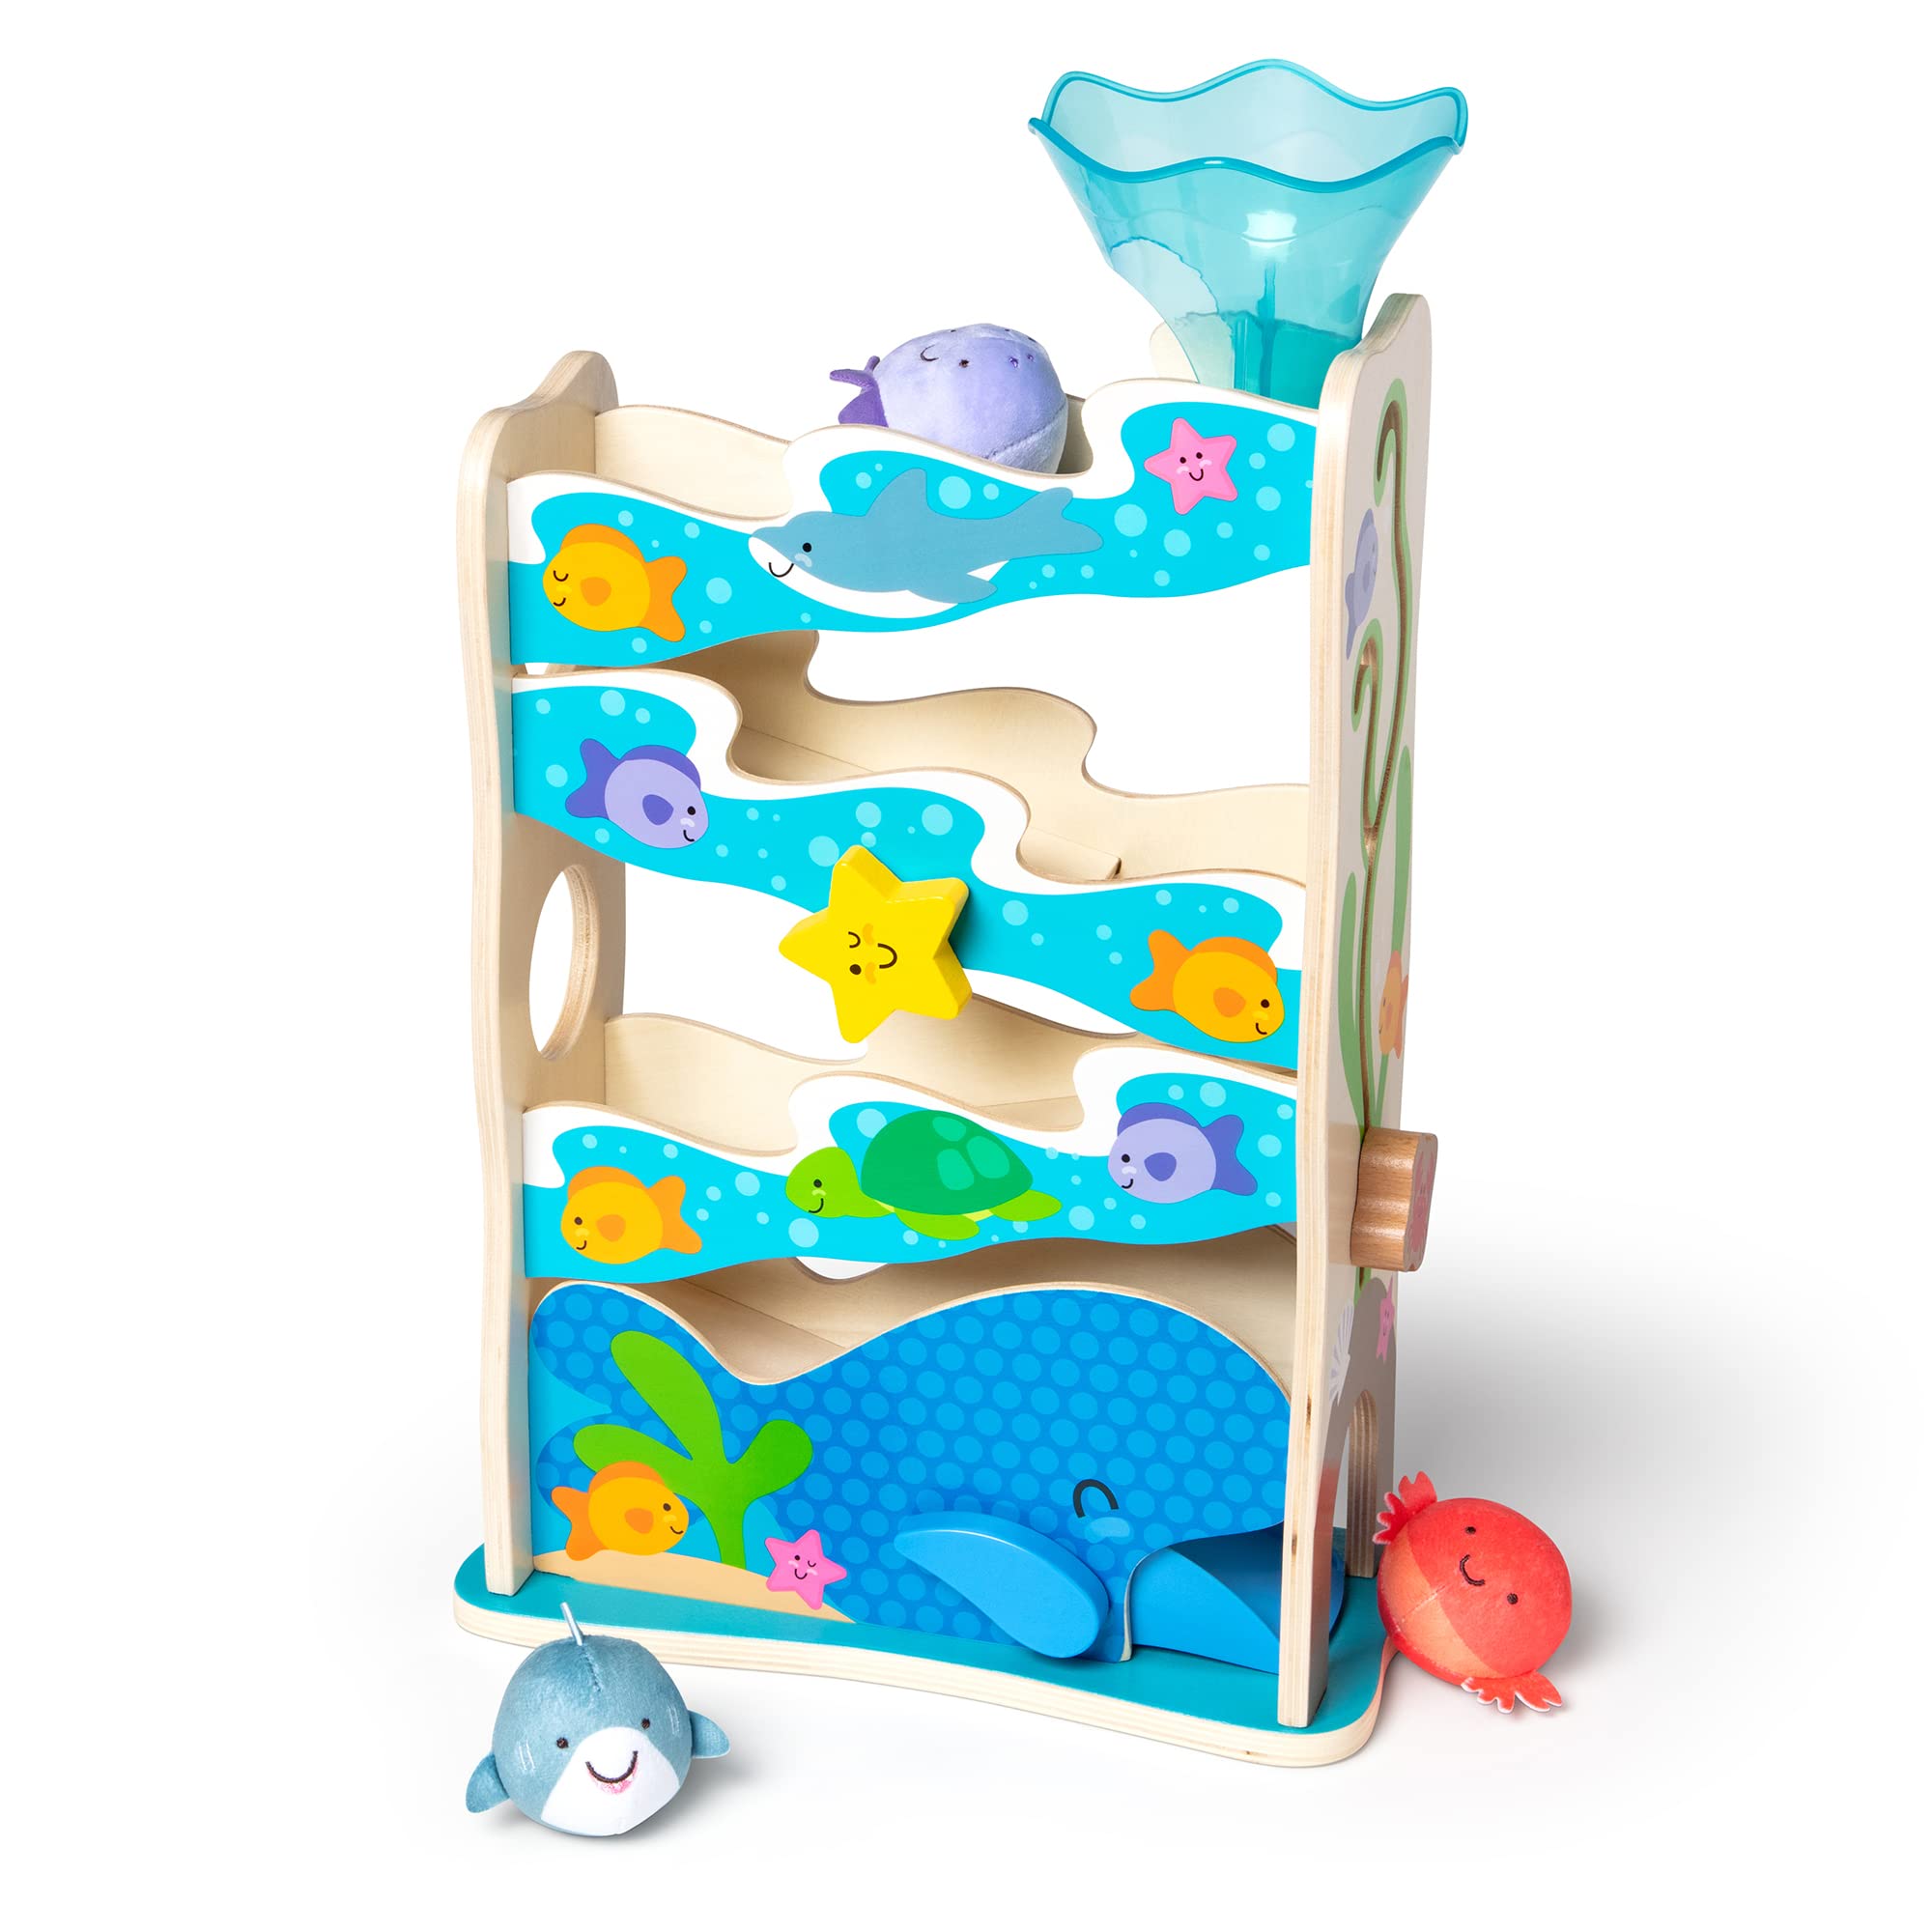 Melissa & Doug Rollables Wooden Ocean Slide Toy (5 Pieces) - Ocean Themed , Early Learning Toys For Infants And Toddlers Ages 1+